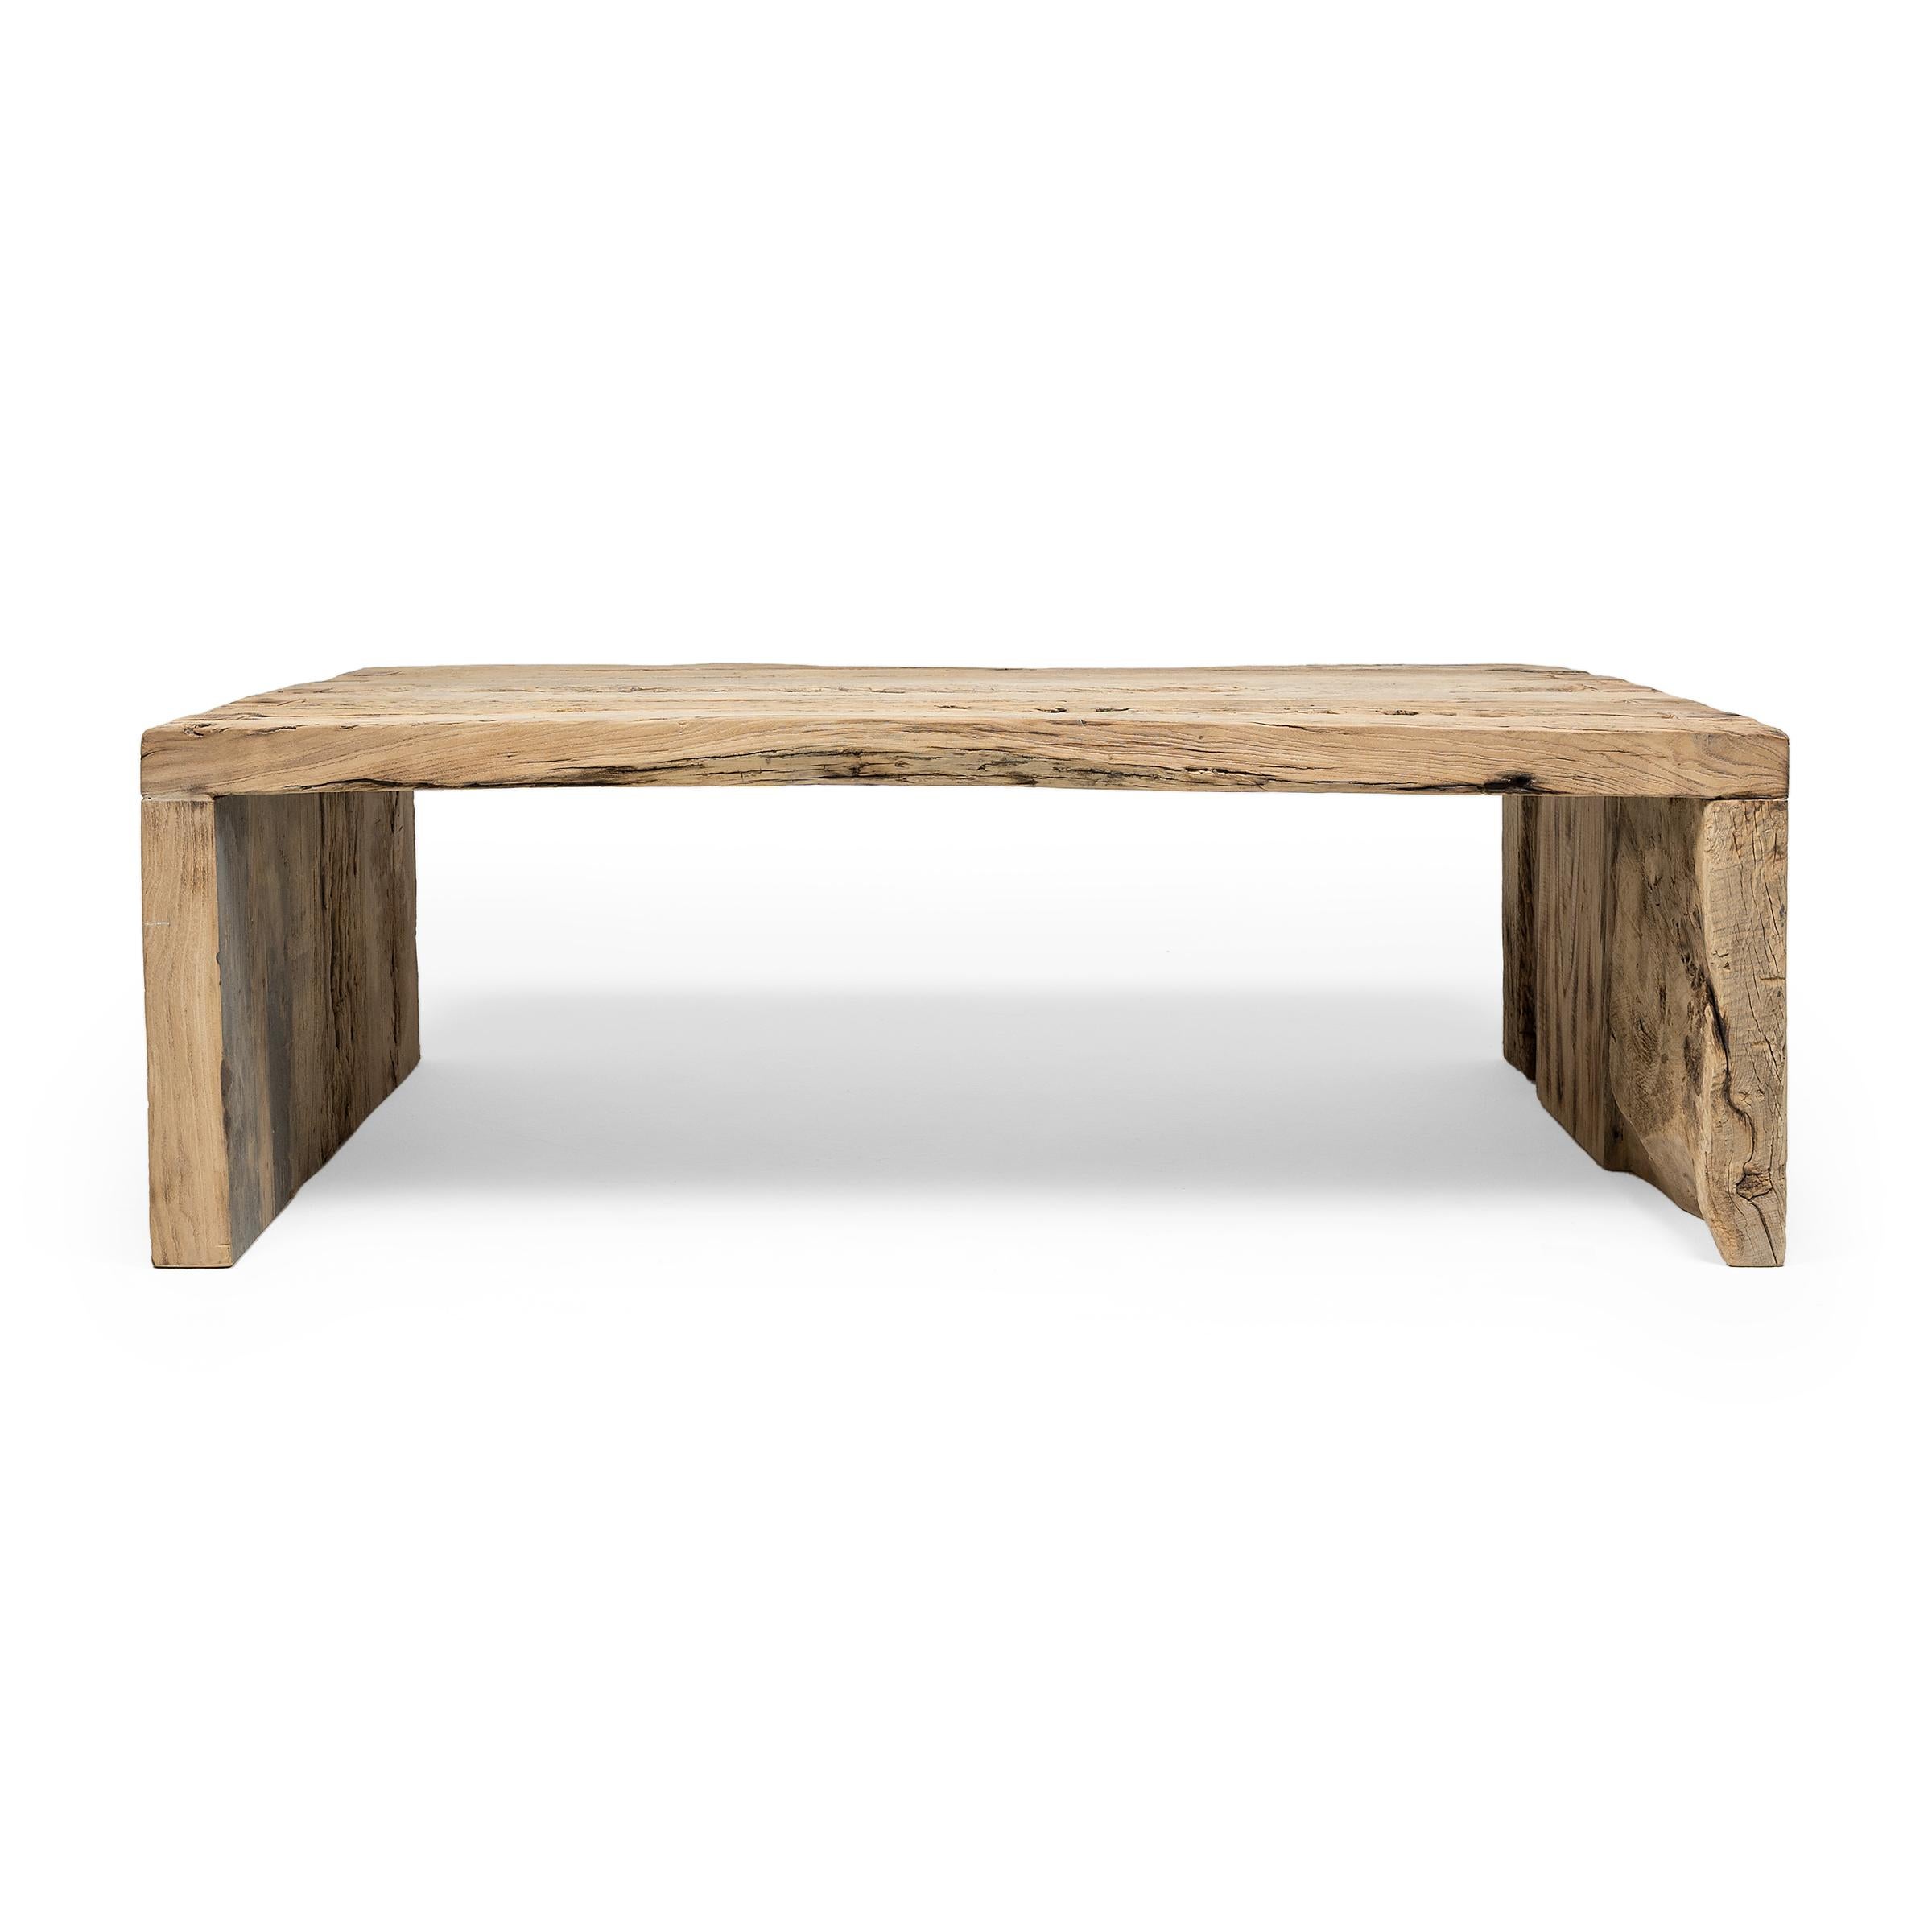 This contemporary coffee table is a celebration of wabi-sabi style. Crafted of Chinese northern elm reclaimed from Qing-dynasty architecture, the table has a minimalist waterfall design and is left unfinished to preserve the natural beauty of its